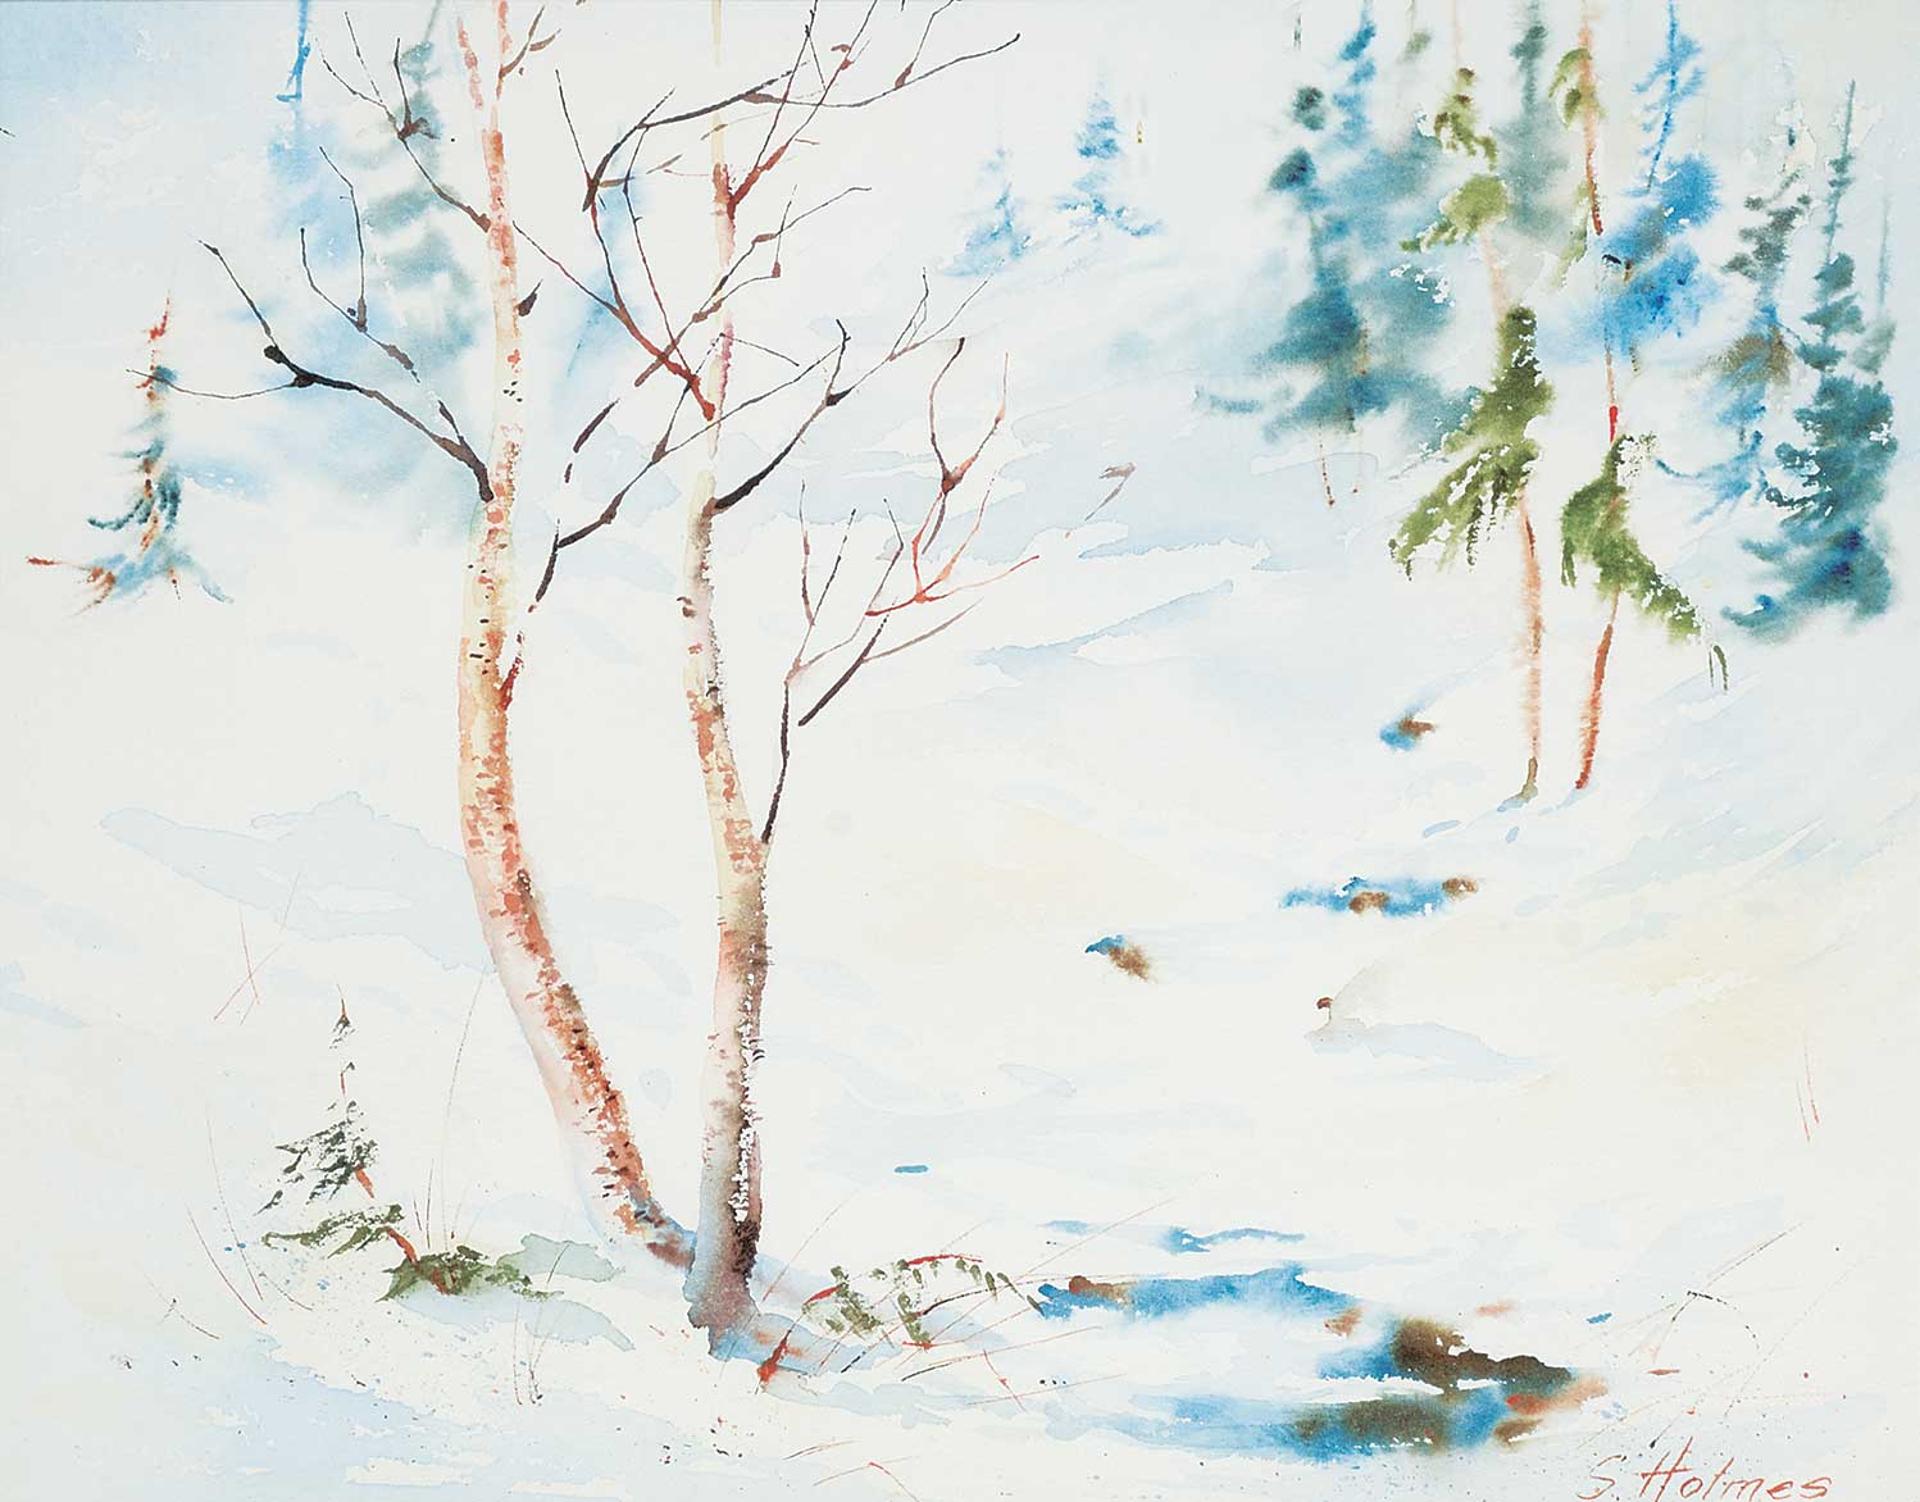 Sharon Christian Holmes - Untitled - Winter Day